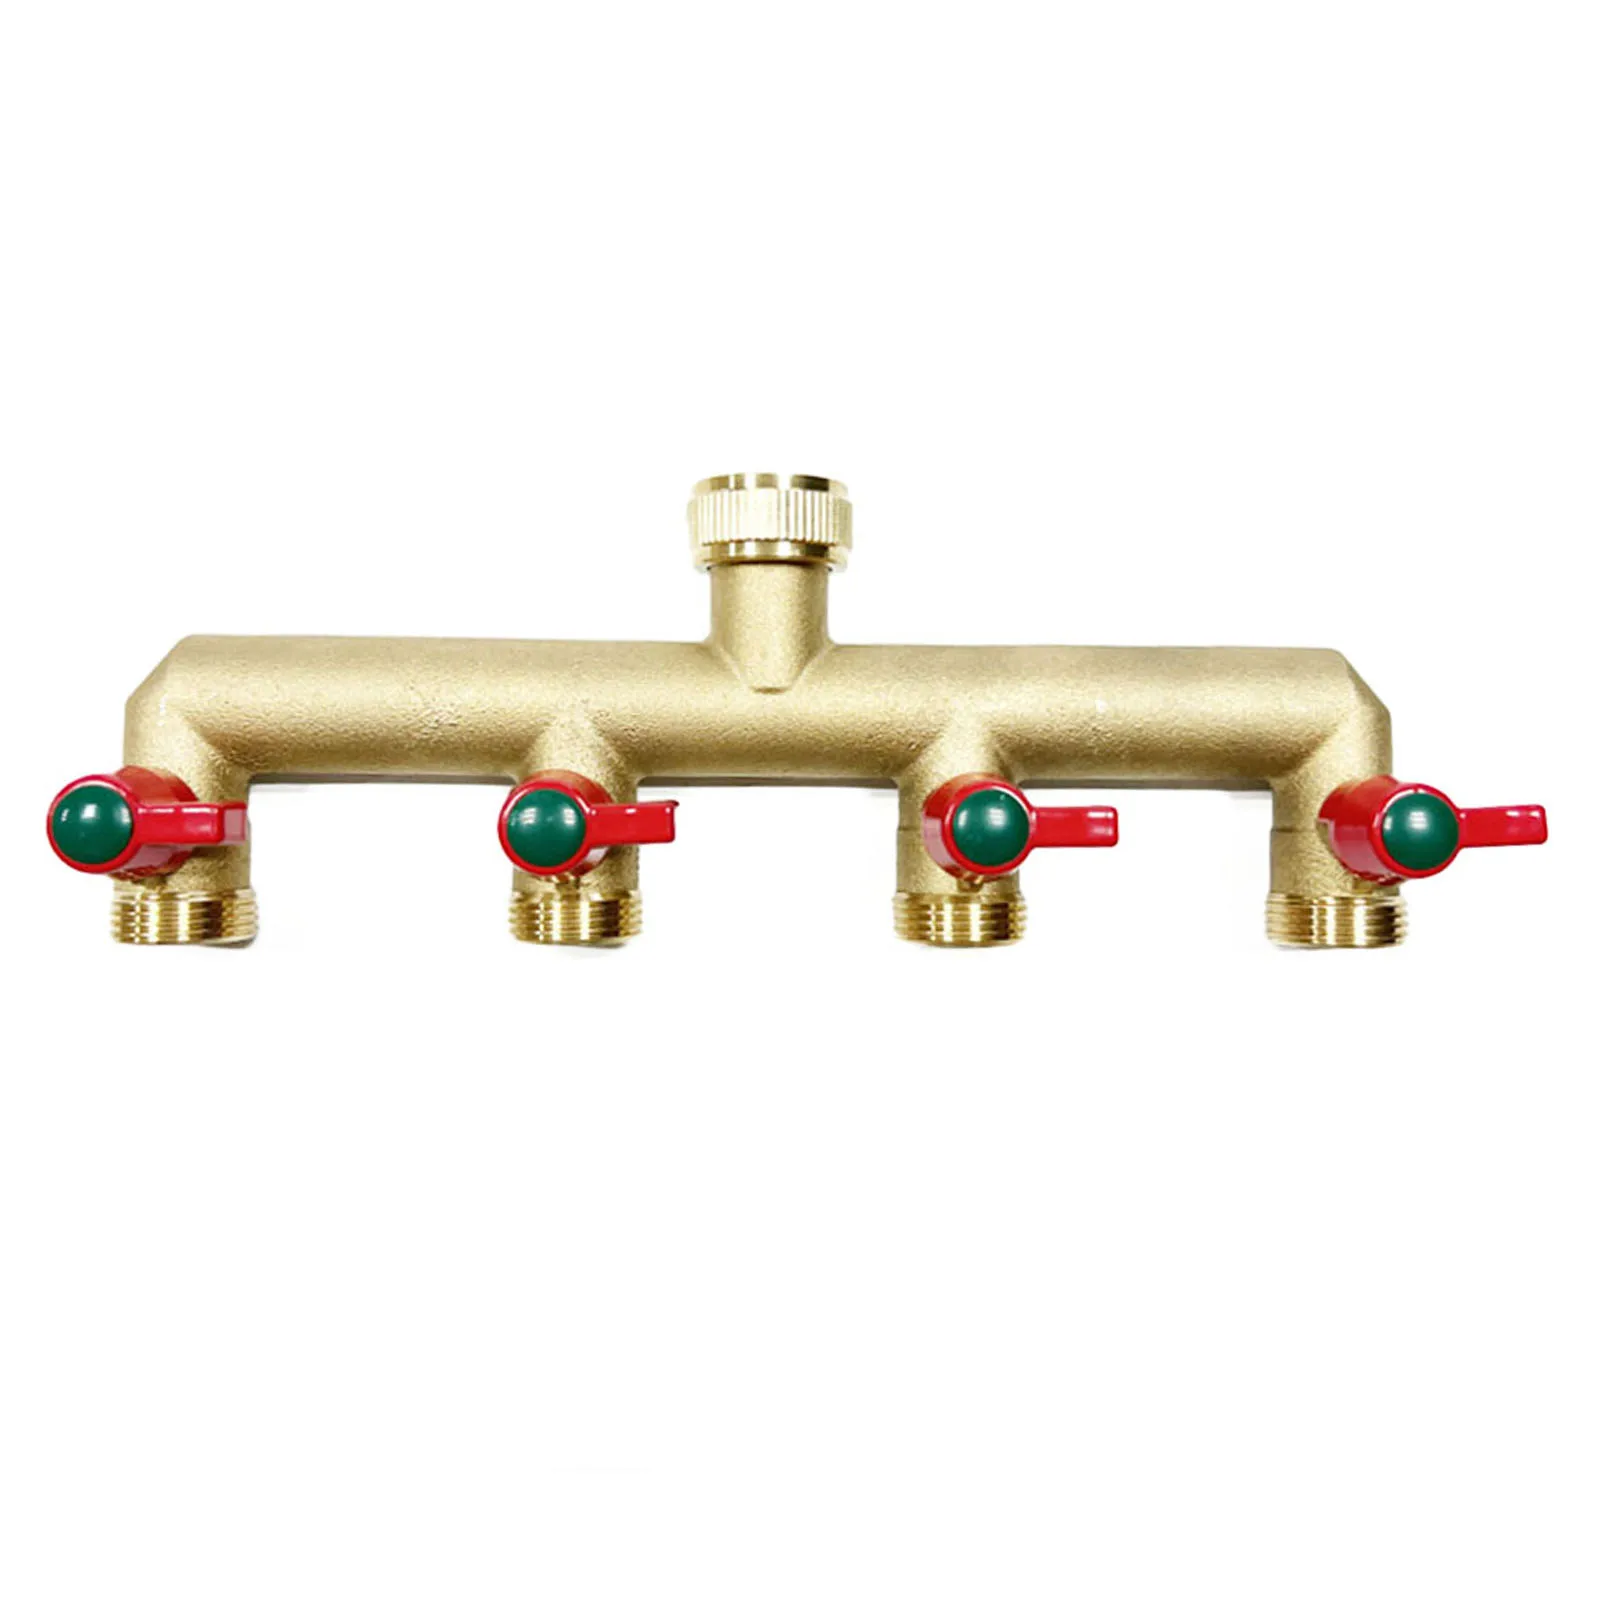 Premium 4 Way Brass Water Tap Distributor Quick and Easy Installation Suitable for Agriculture and Lawn Use (3/4 inch)